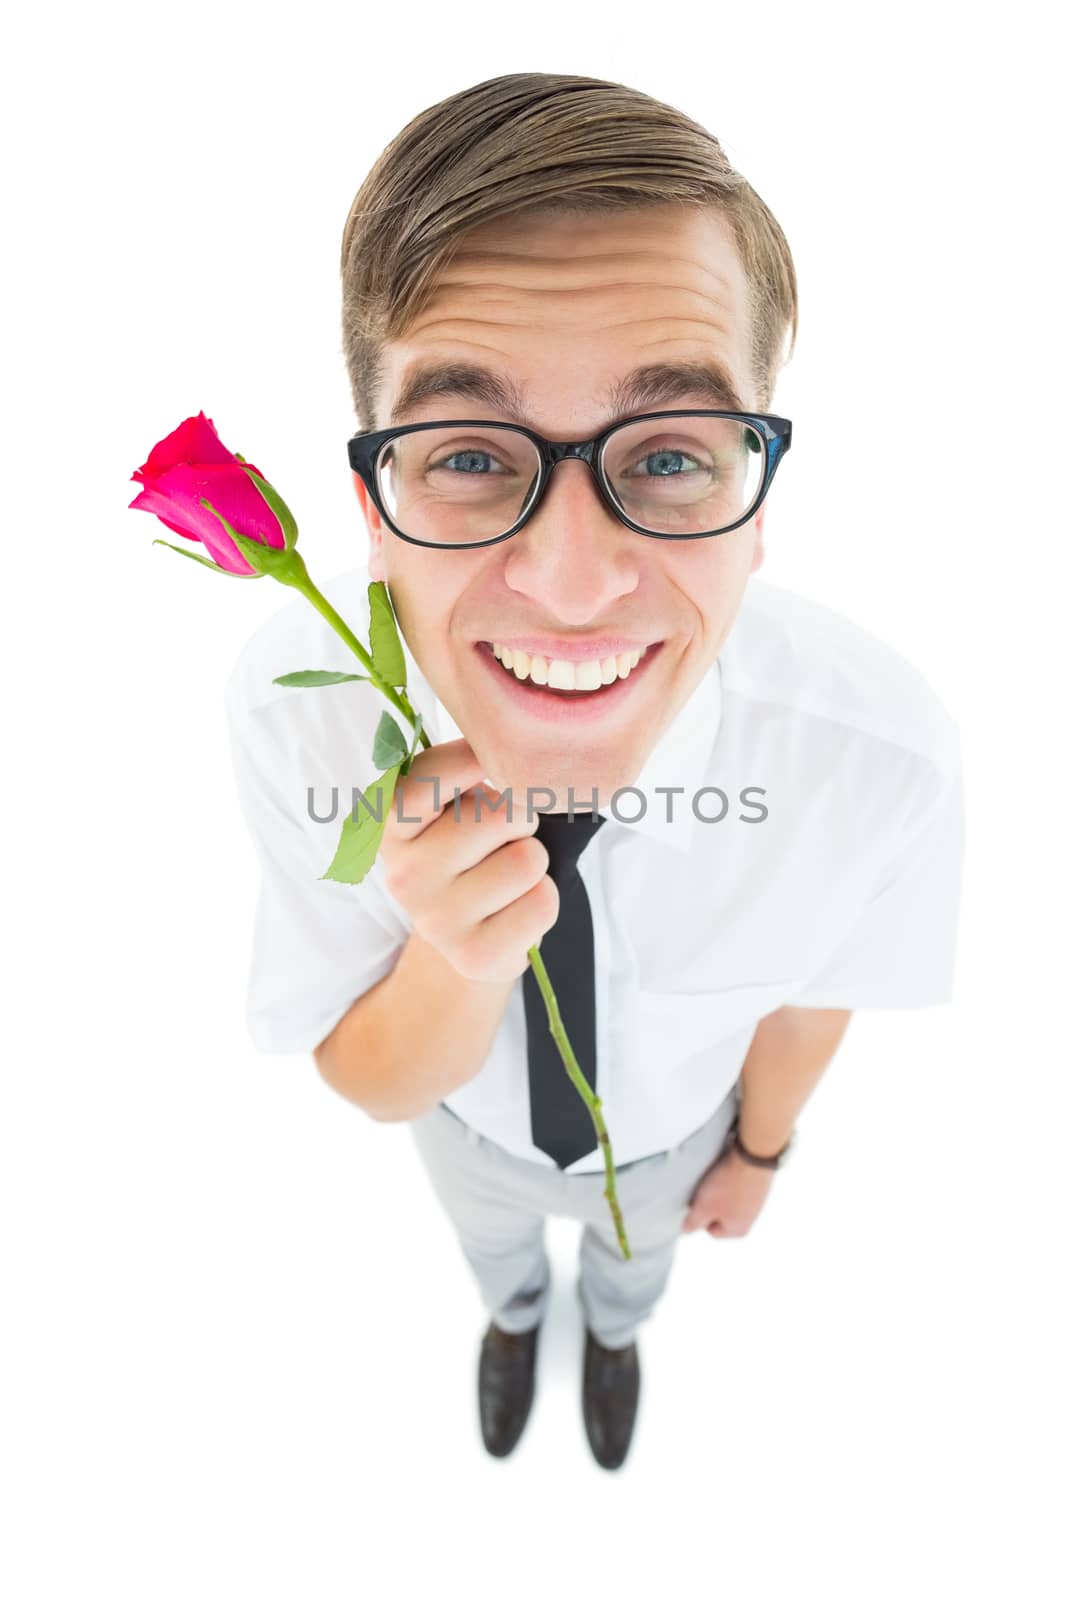 Geeky hipster holding a red rose on white background